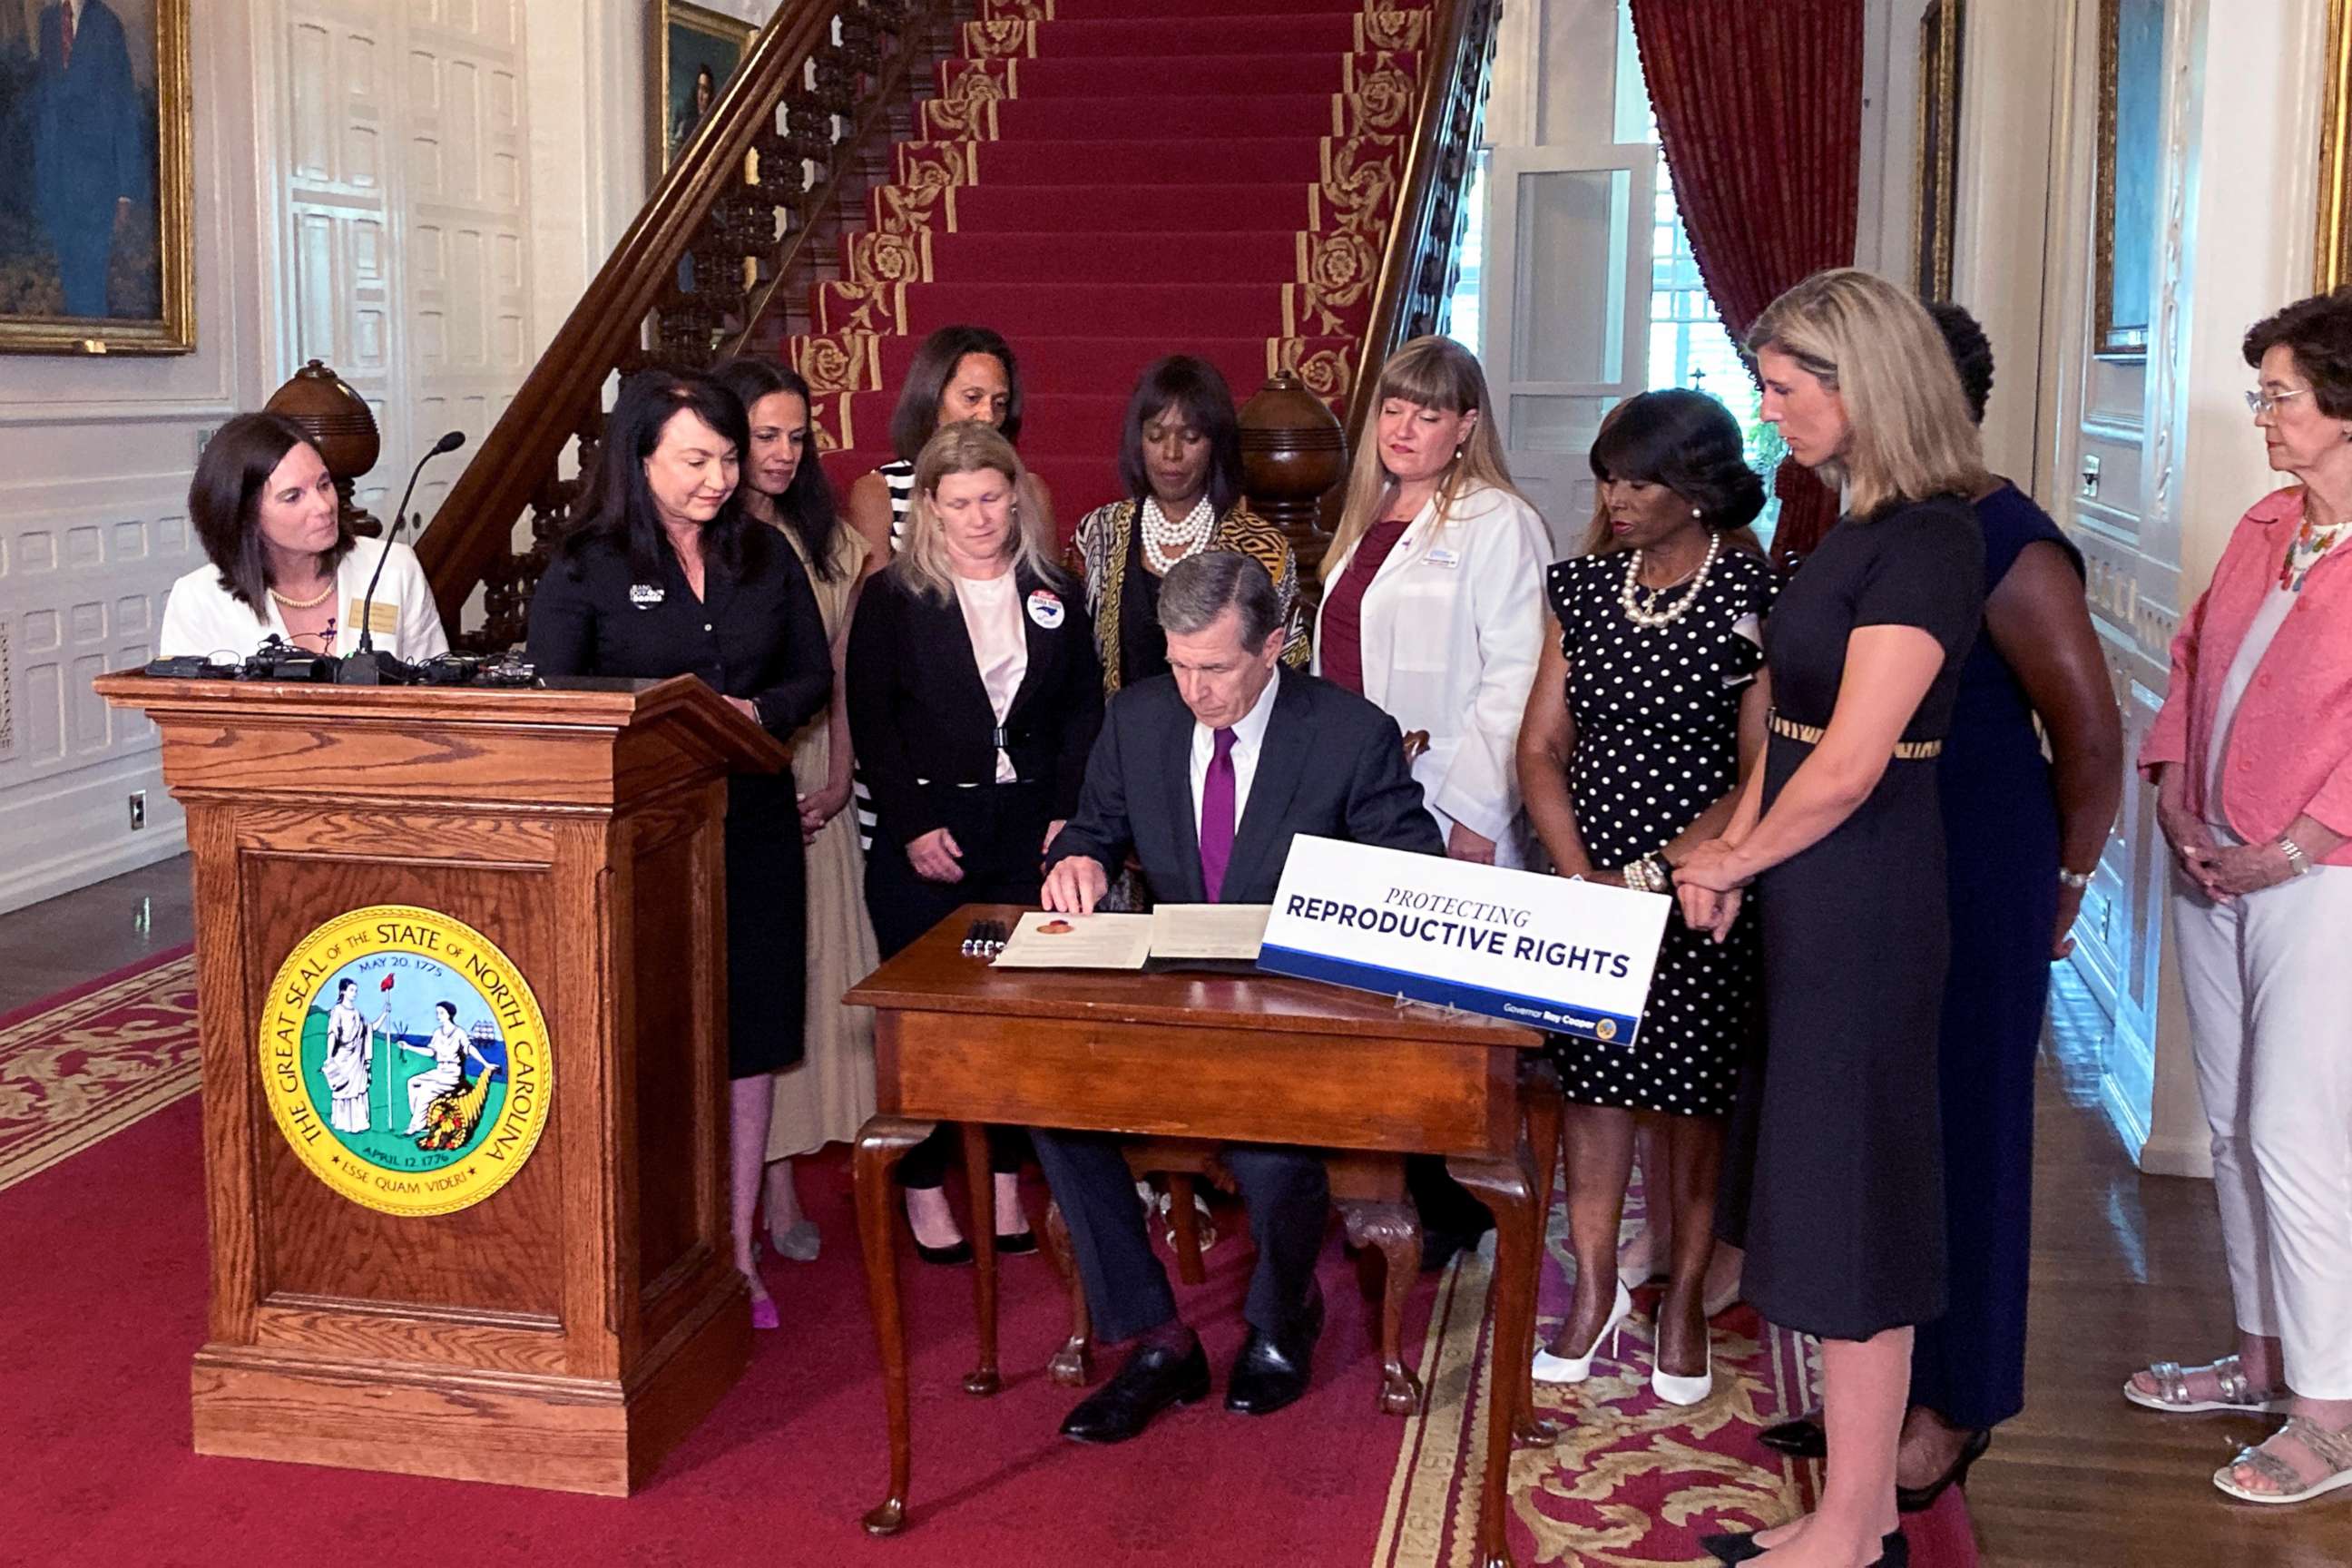 PHOTO: North Carolina Democratic Gov. Roy Cooper signs an executive order designed to protect abortion rights in the state at the Executive Mansion in Raleigh, N.C. on July 6, 2022.